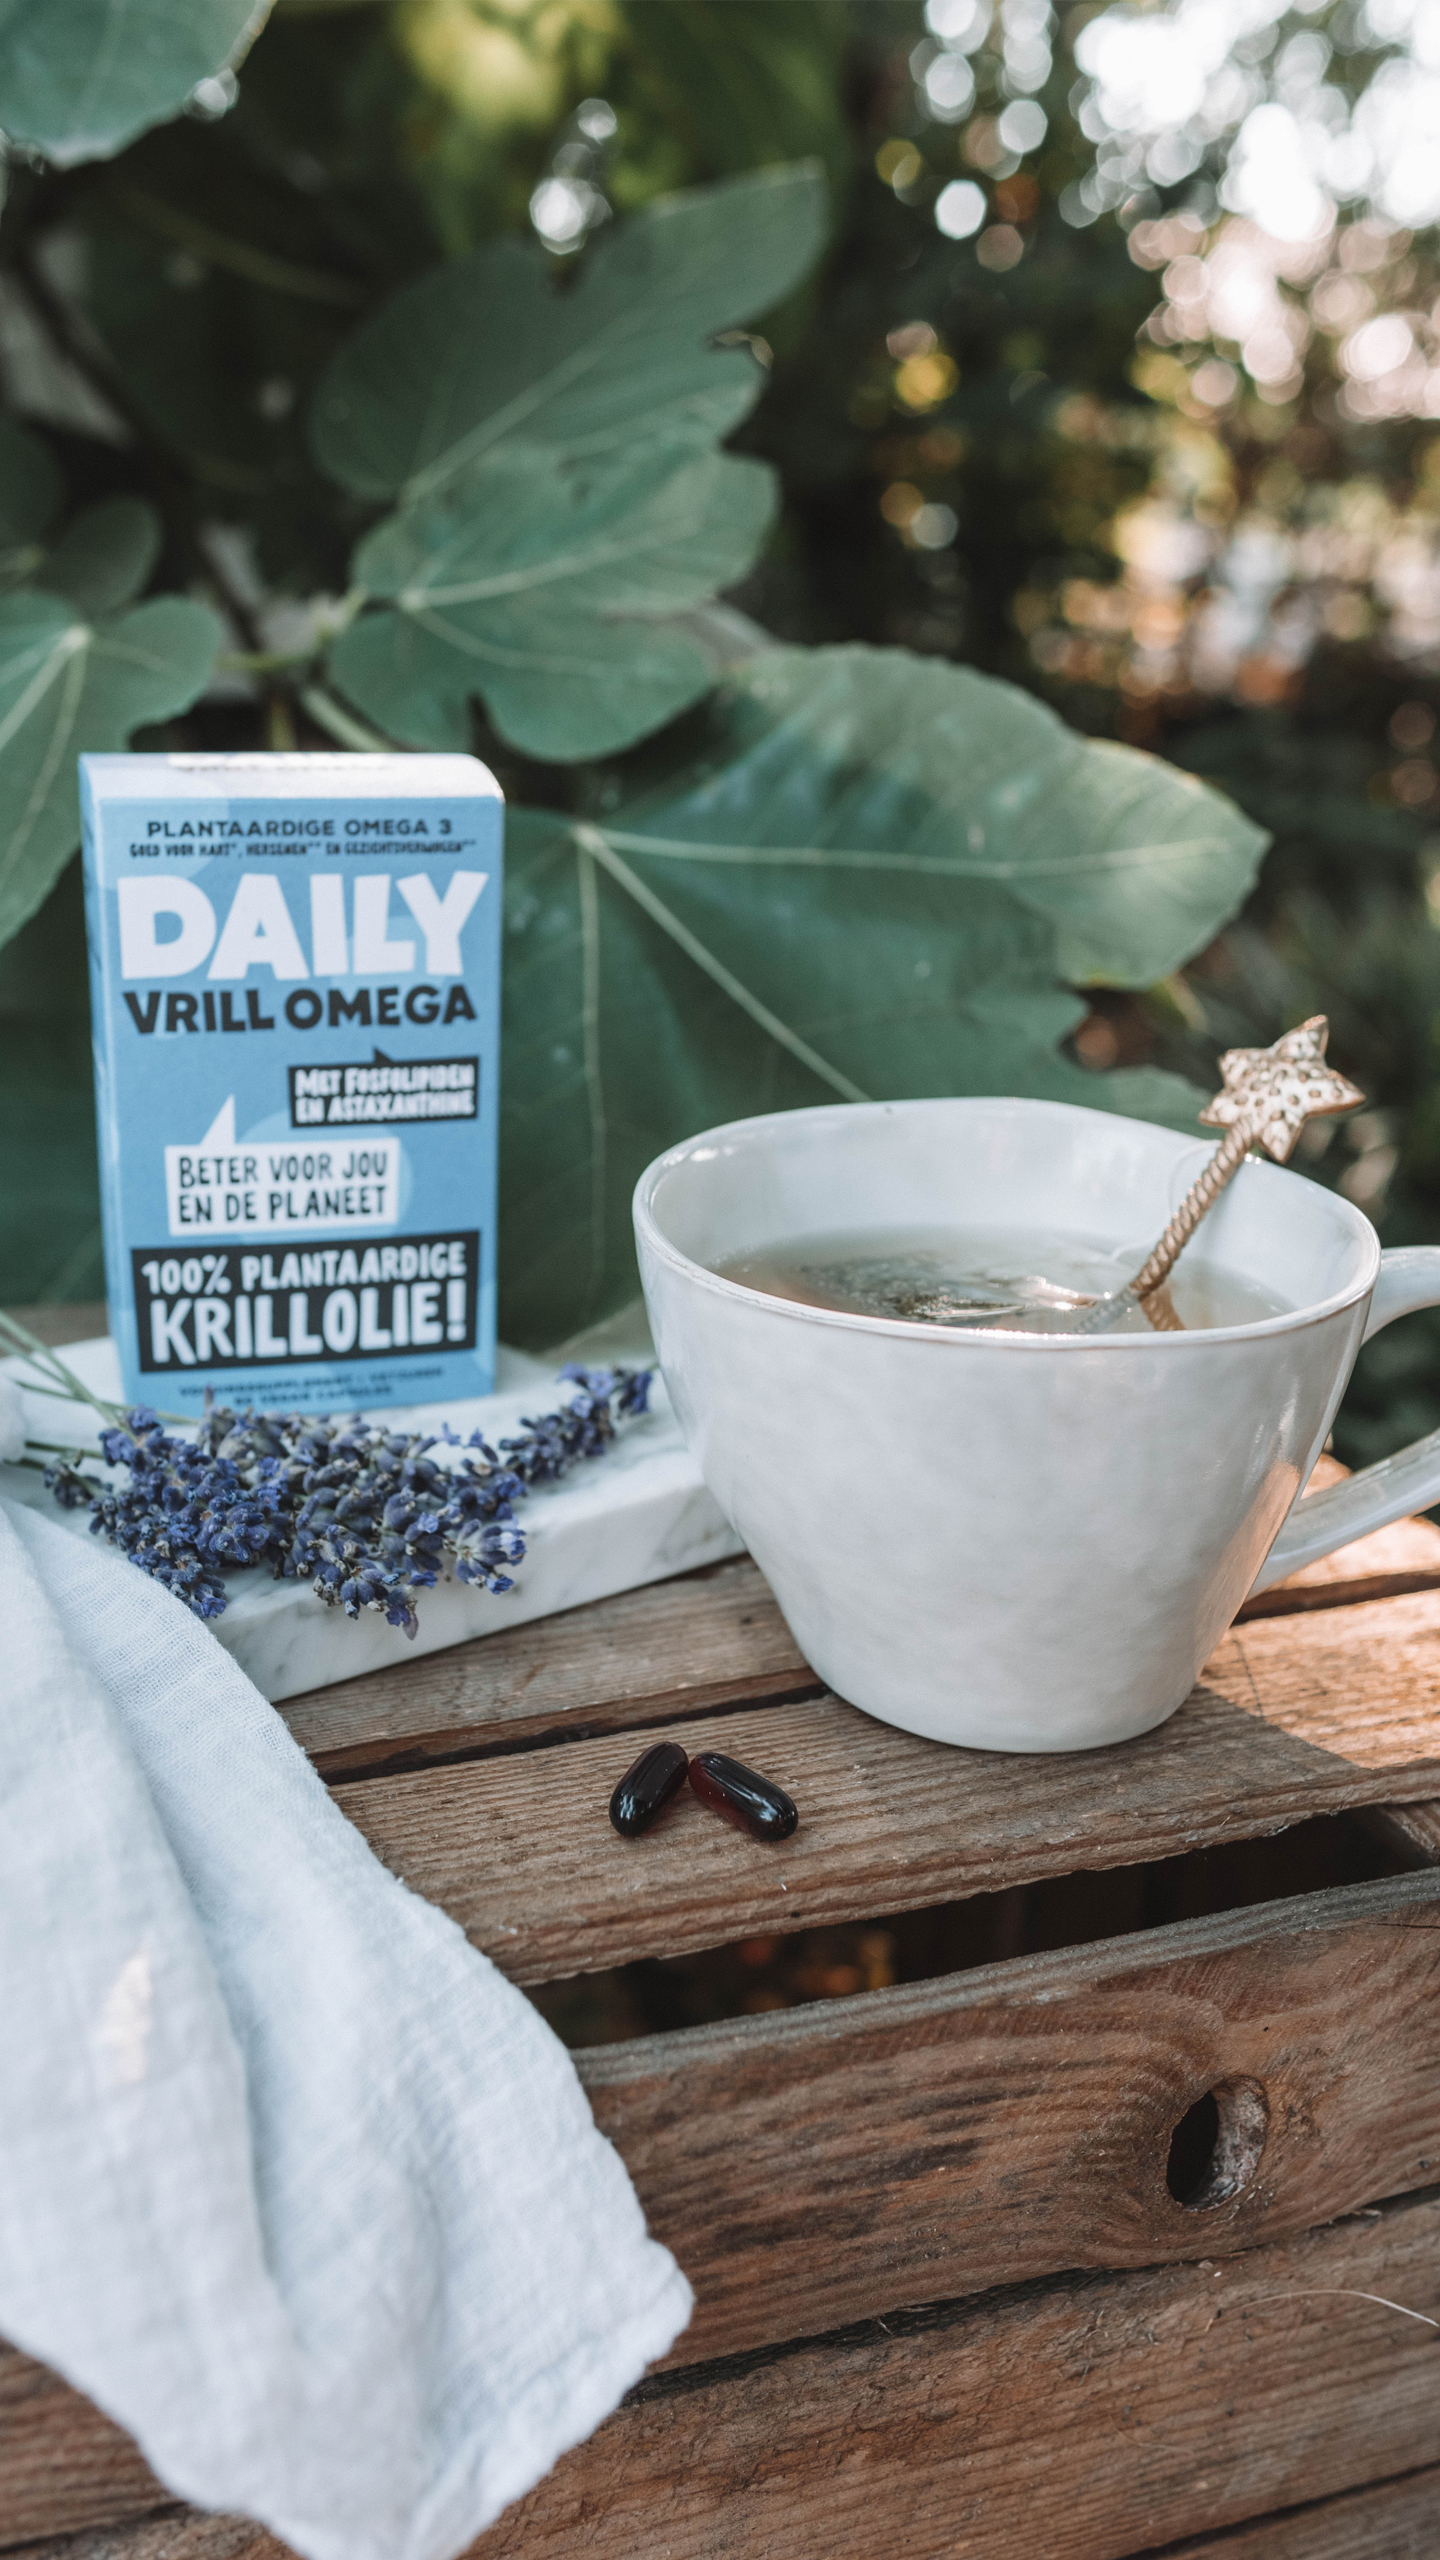 Daily Supplements Daily Vrill Omega